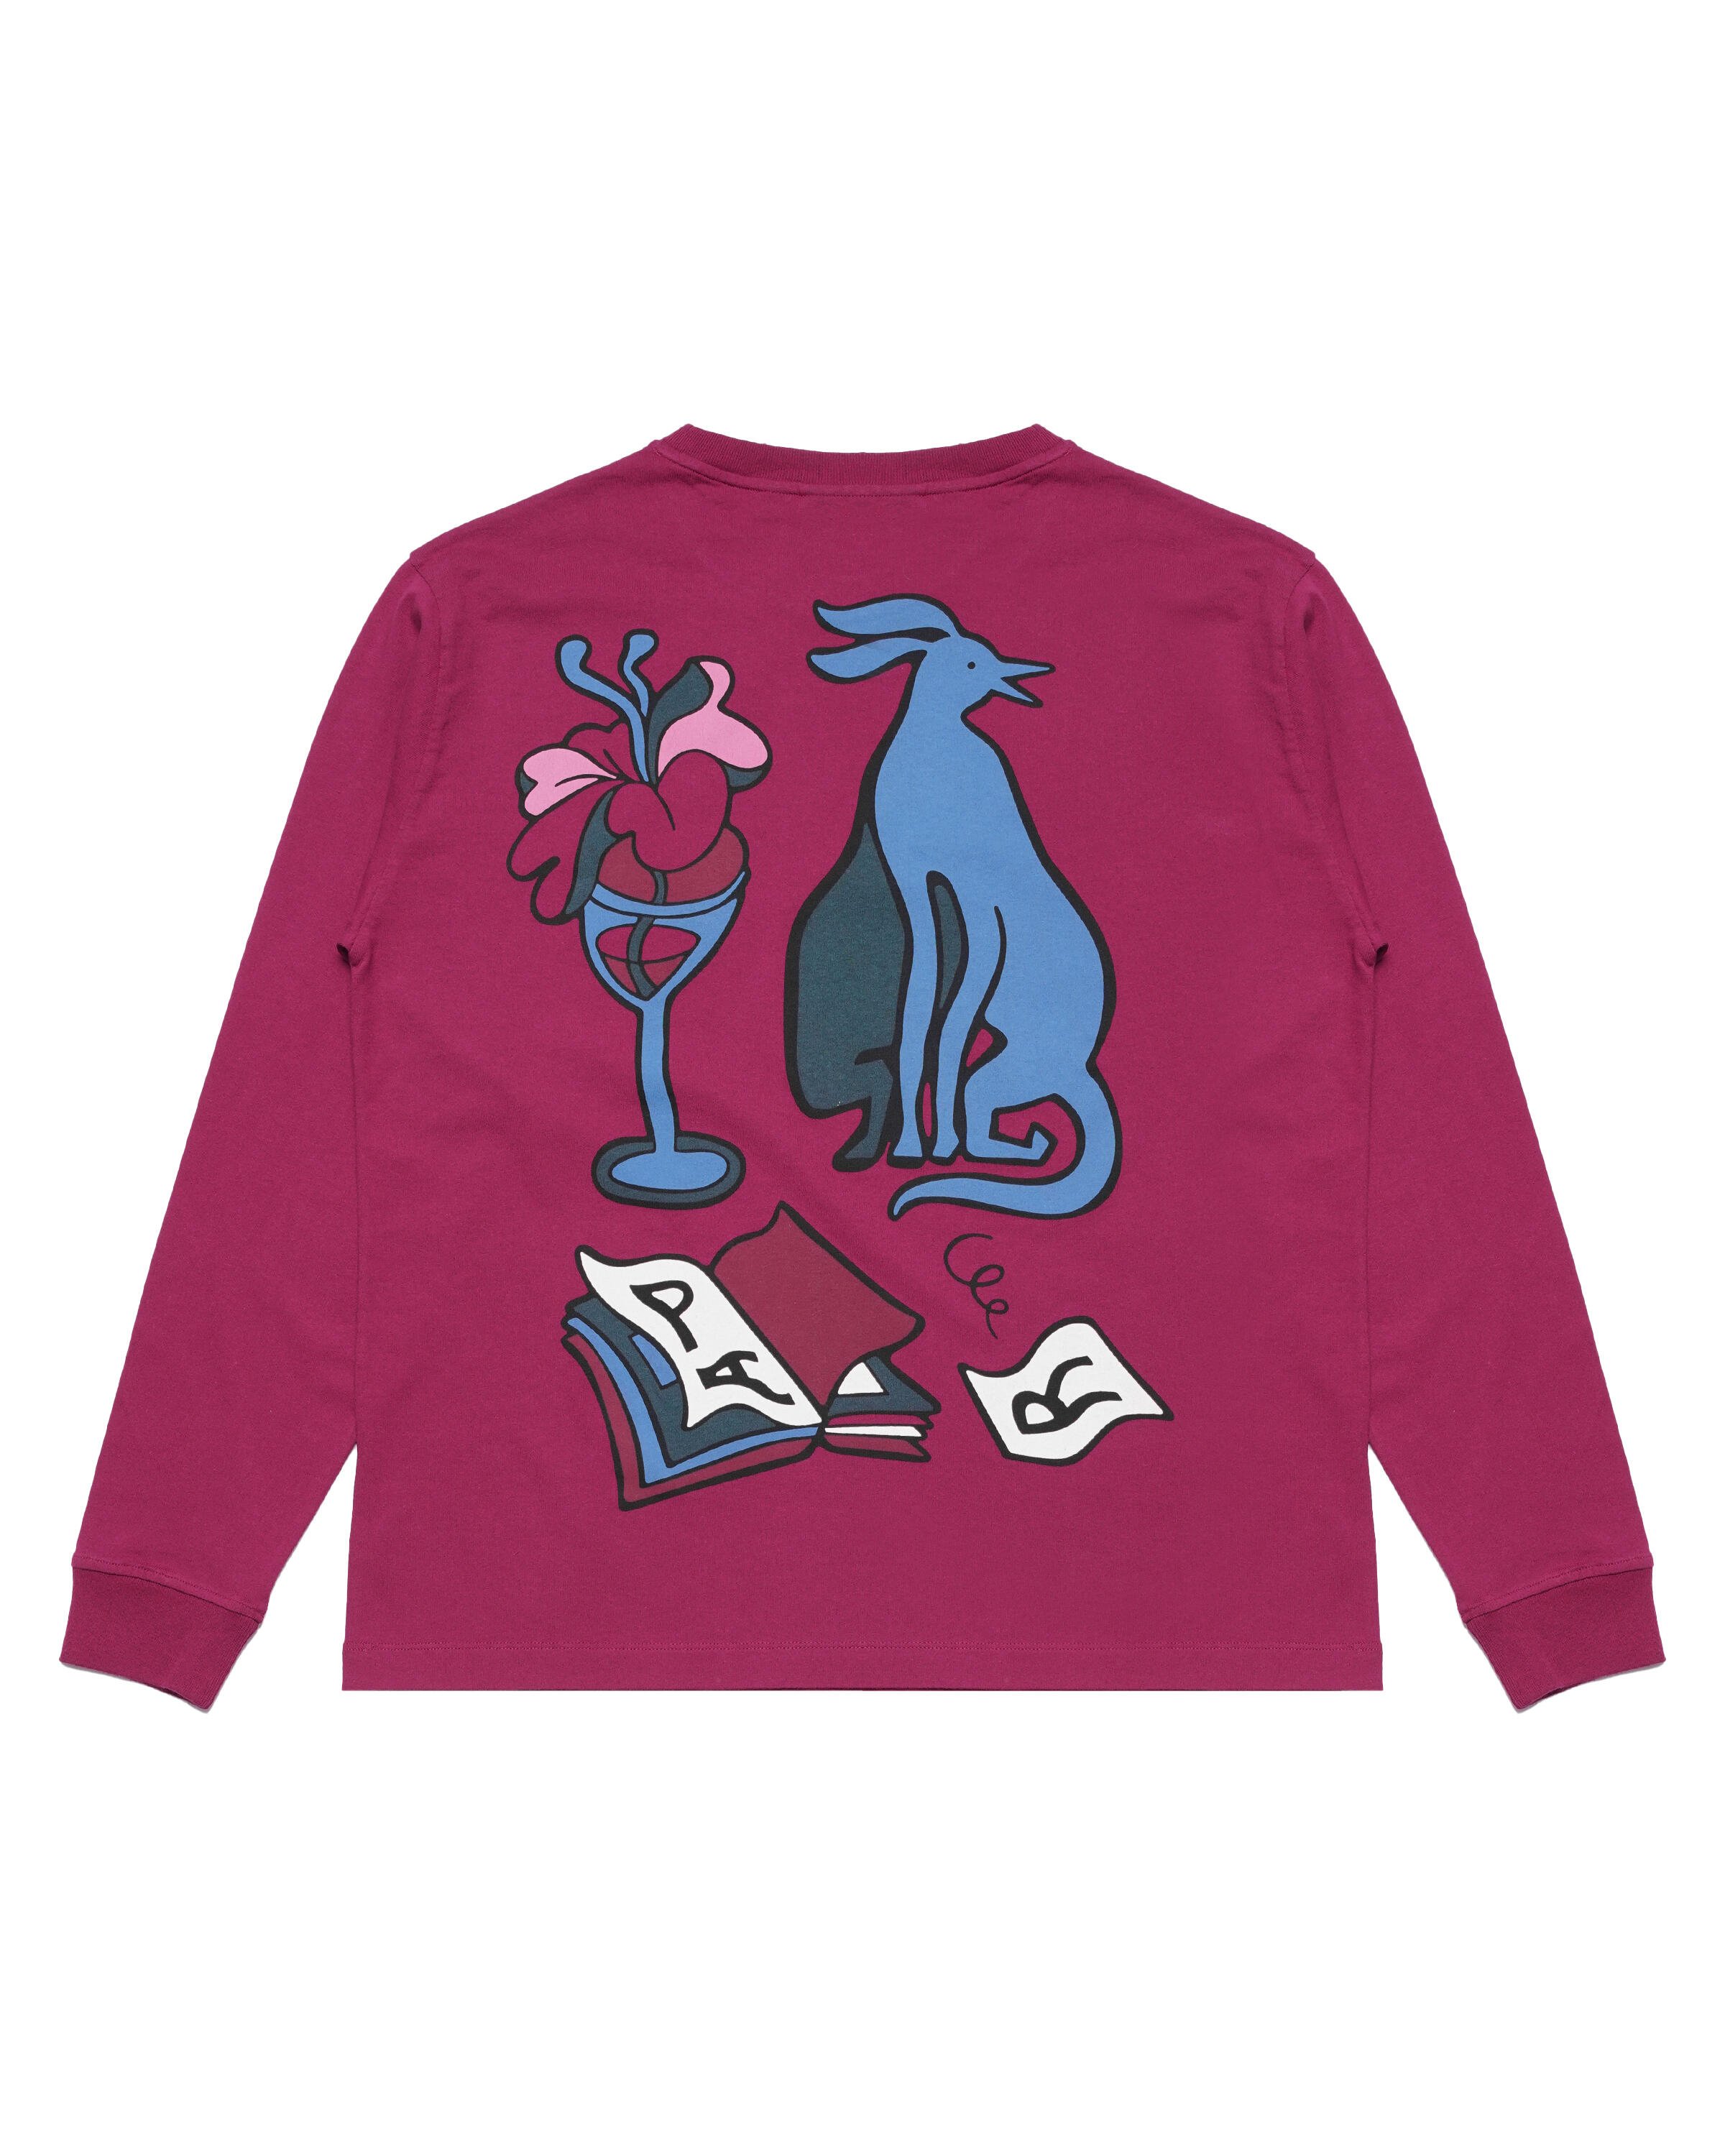 by Parra wine and books long sleeve t-shirt